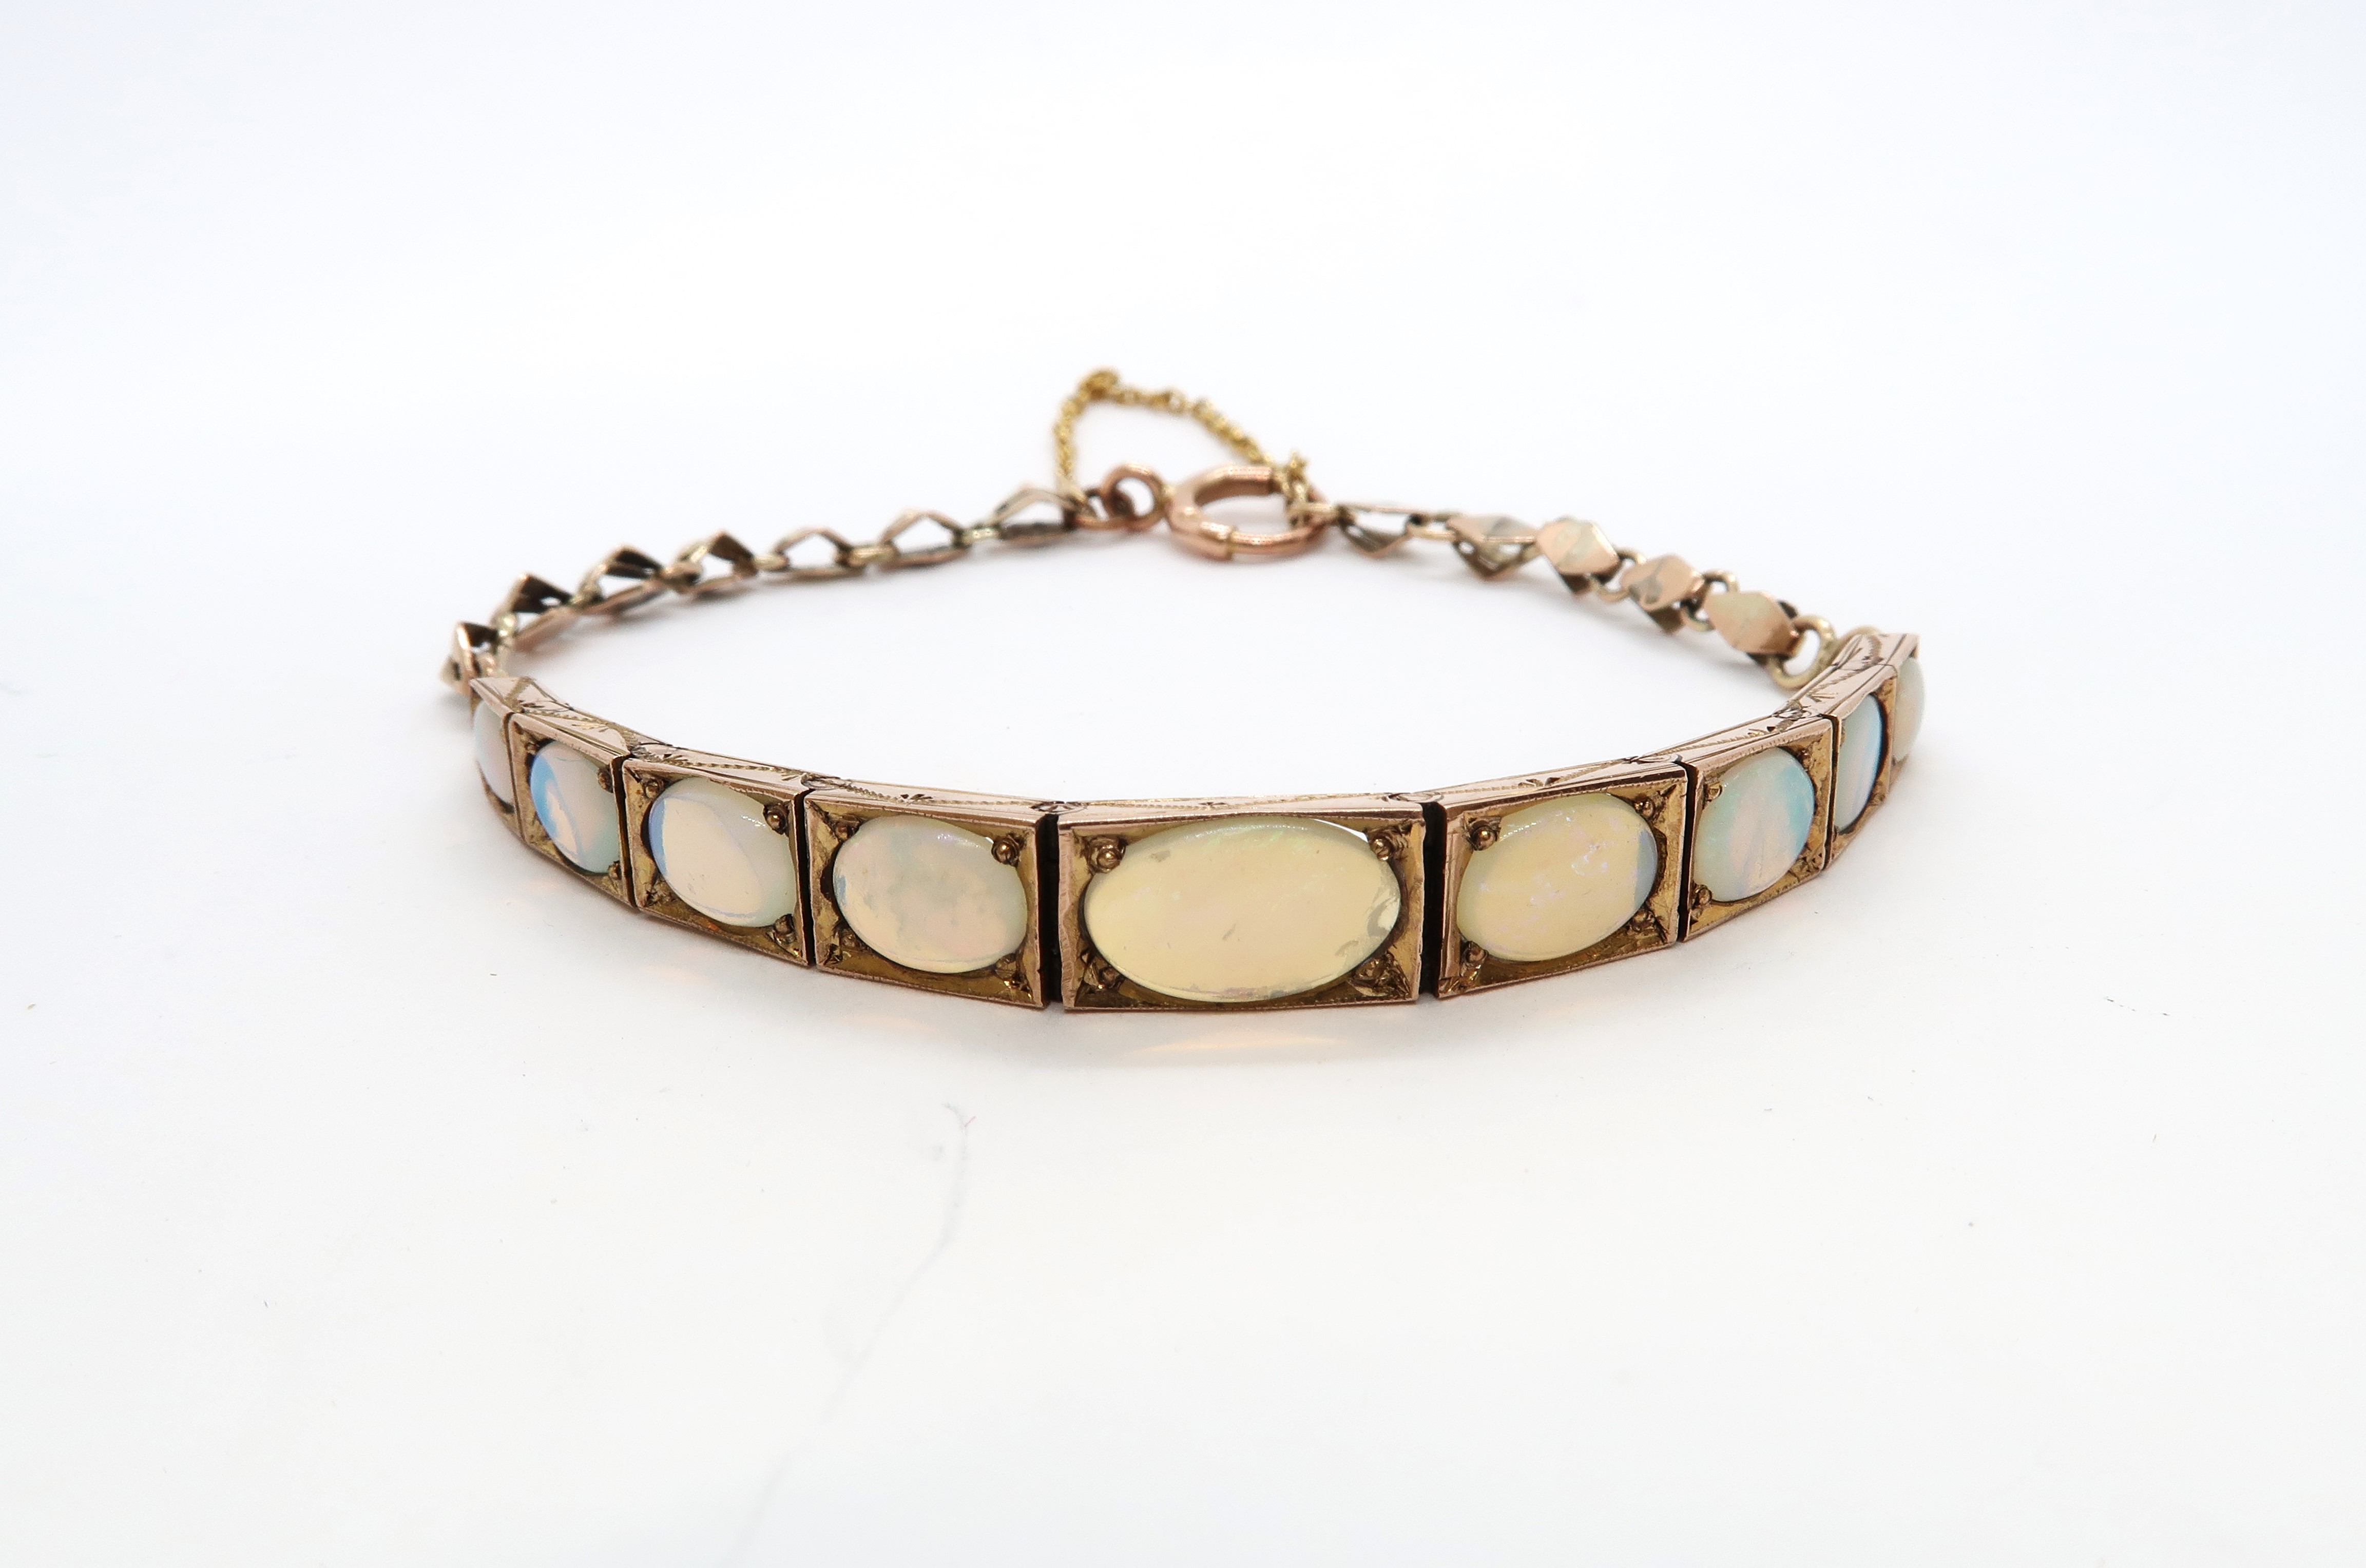 A 9ct yellow gold and opal articulated bracelet with nine graduated opals - 7.1 grams